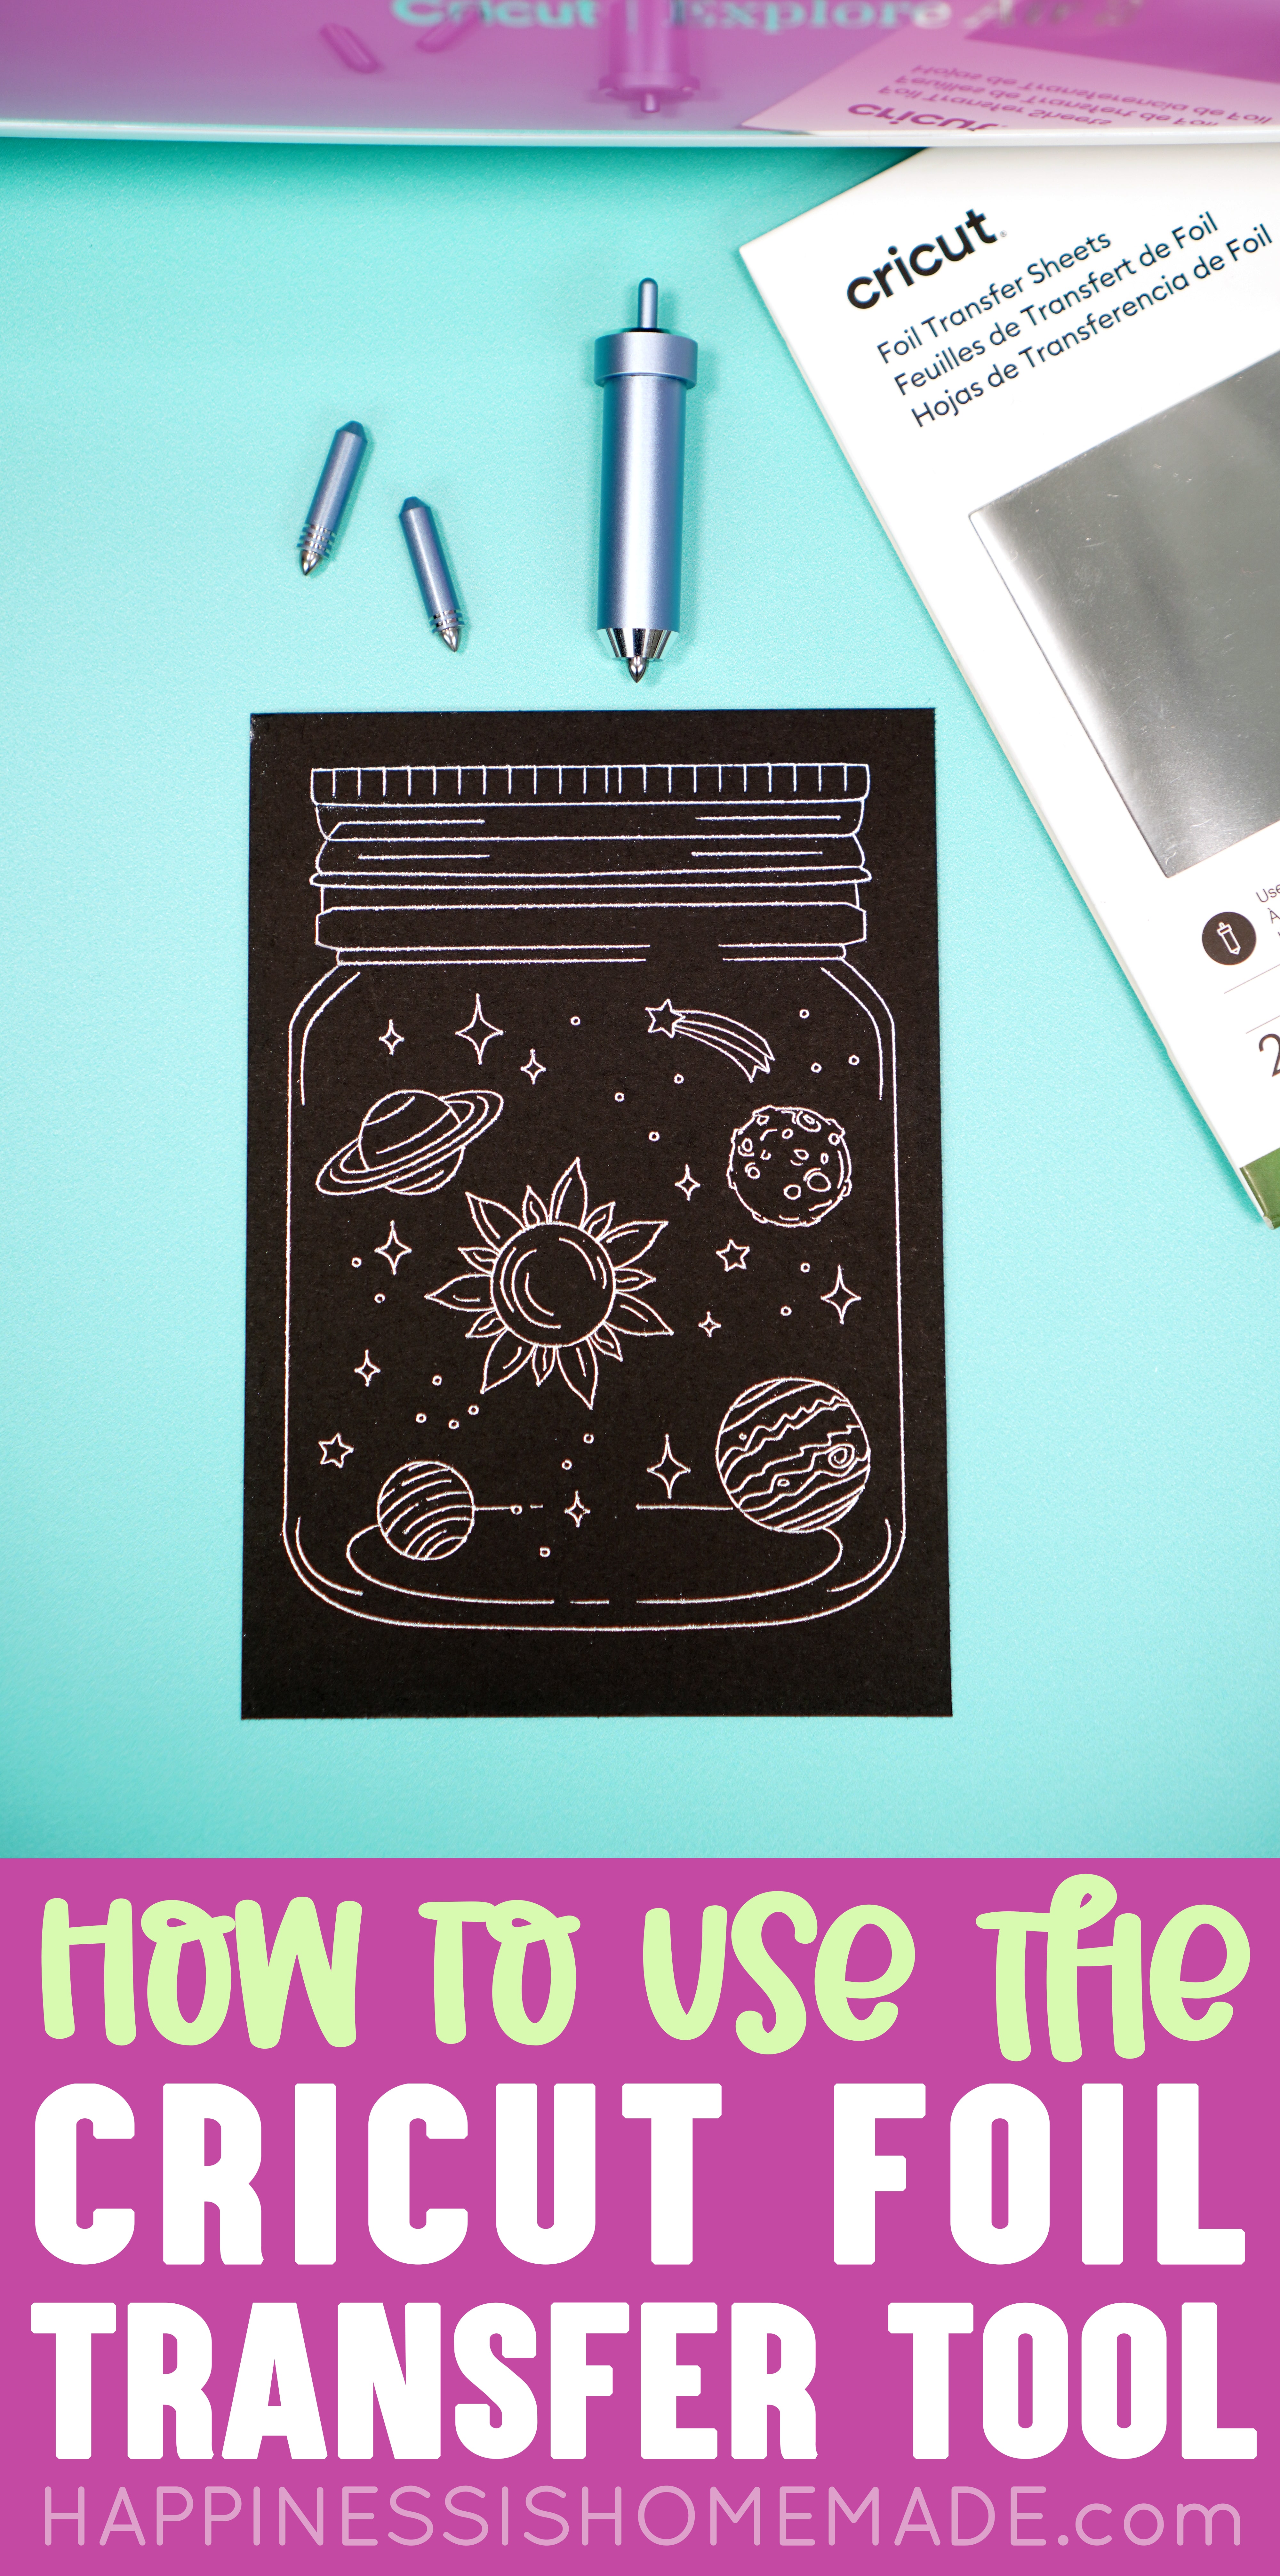 How to Use Heat Transfer Foil With Your Cricut - DigitalistDesigns